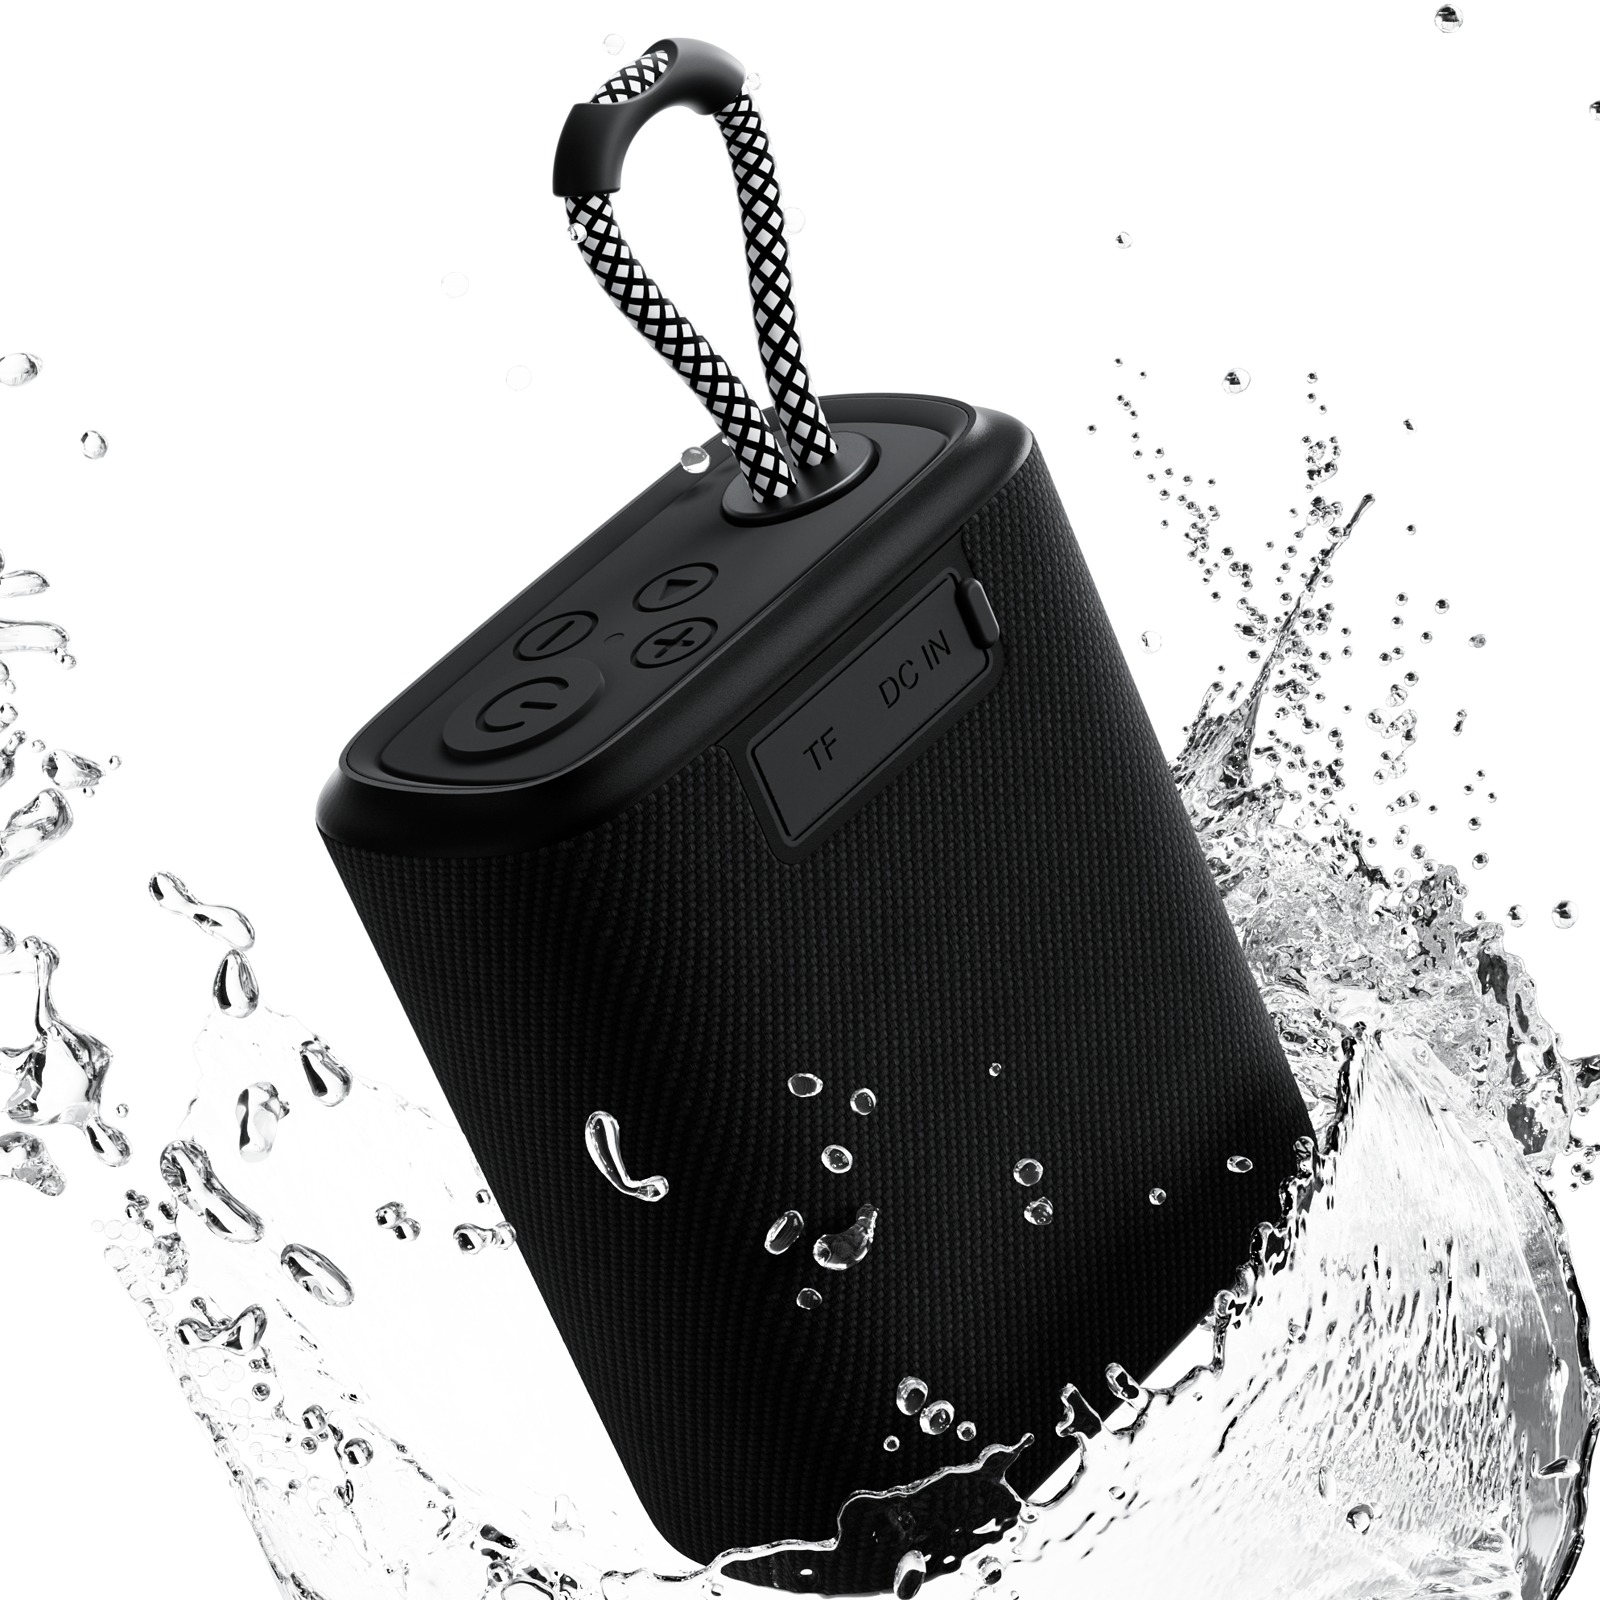 Portable IPX7 Waterproof Bluetooth Speaker, Shower Speaker FM Radio with HD Sound,Outdoor Speaker, TF Card SD Aux, 8H Playtime, True Wireless Stereo,Black - image 1 of 7